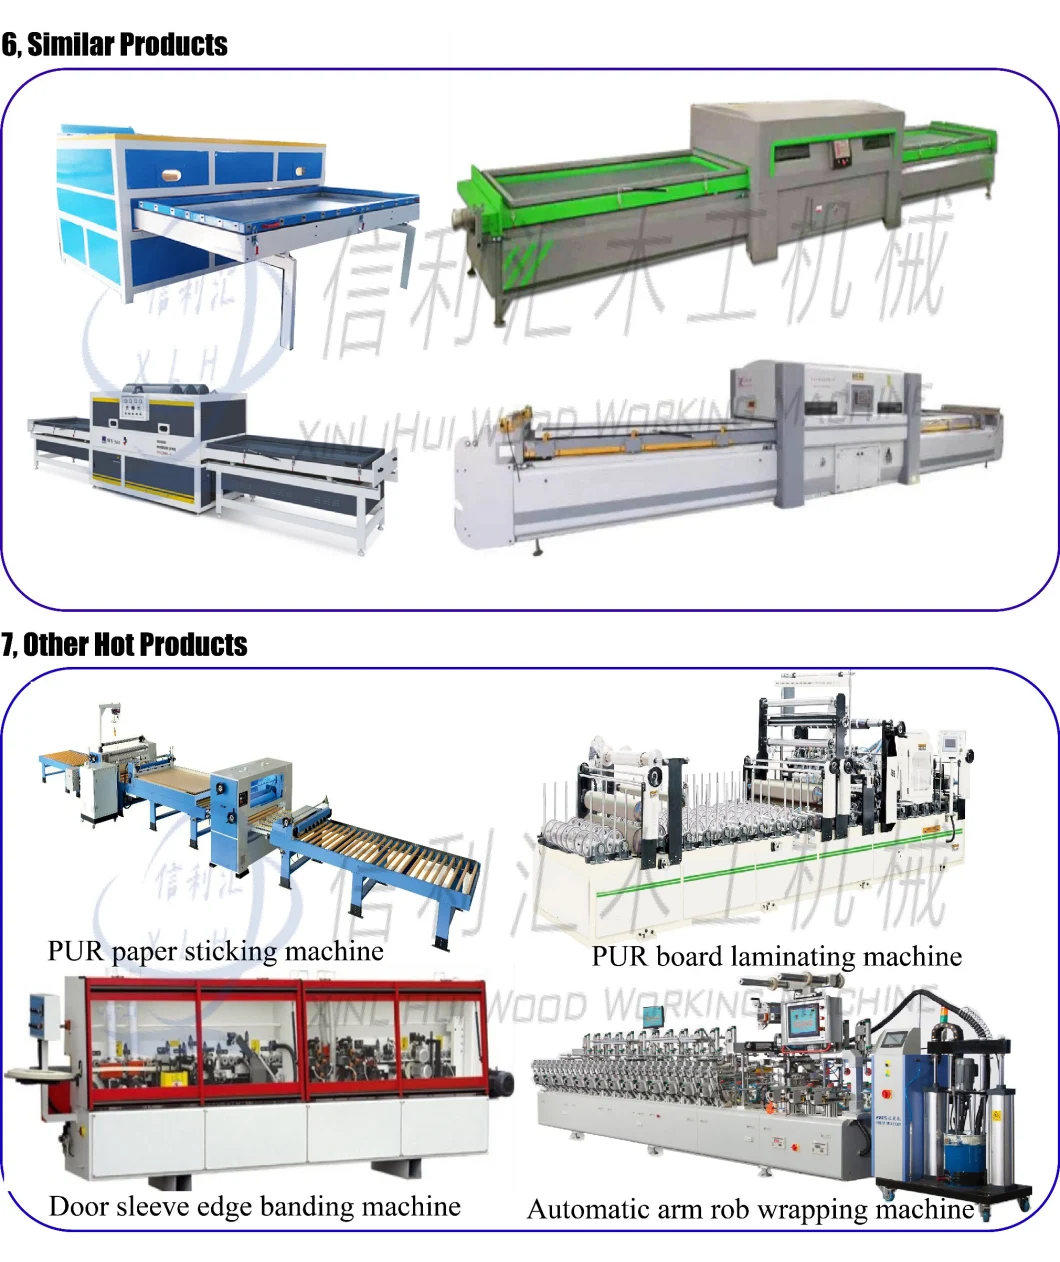 Pneumatic Double Cylinder Car Lift, Pneumatic Double Cylinder Lift, Pneumatic Lift, Pneumatic in Ground Lift Made in China